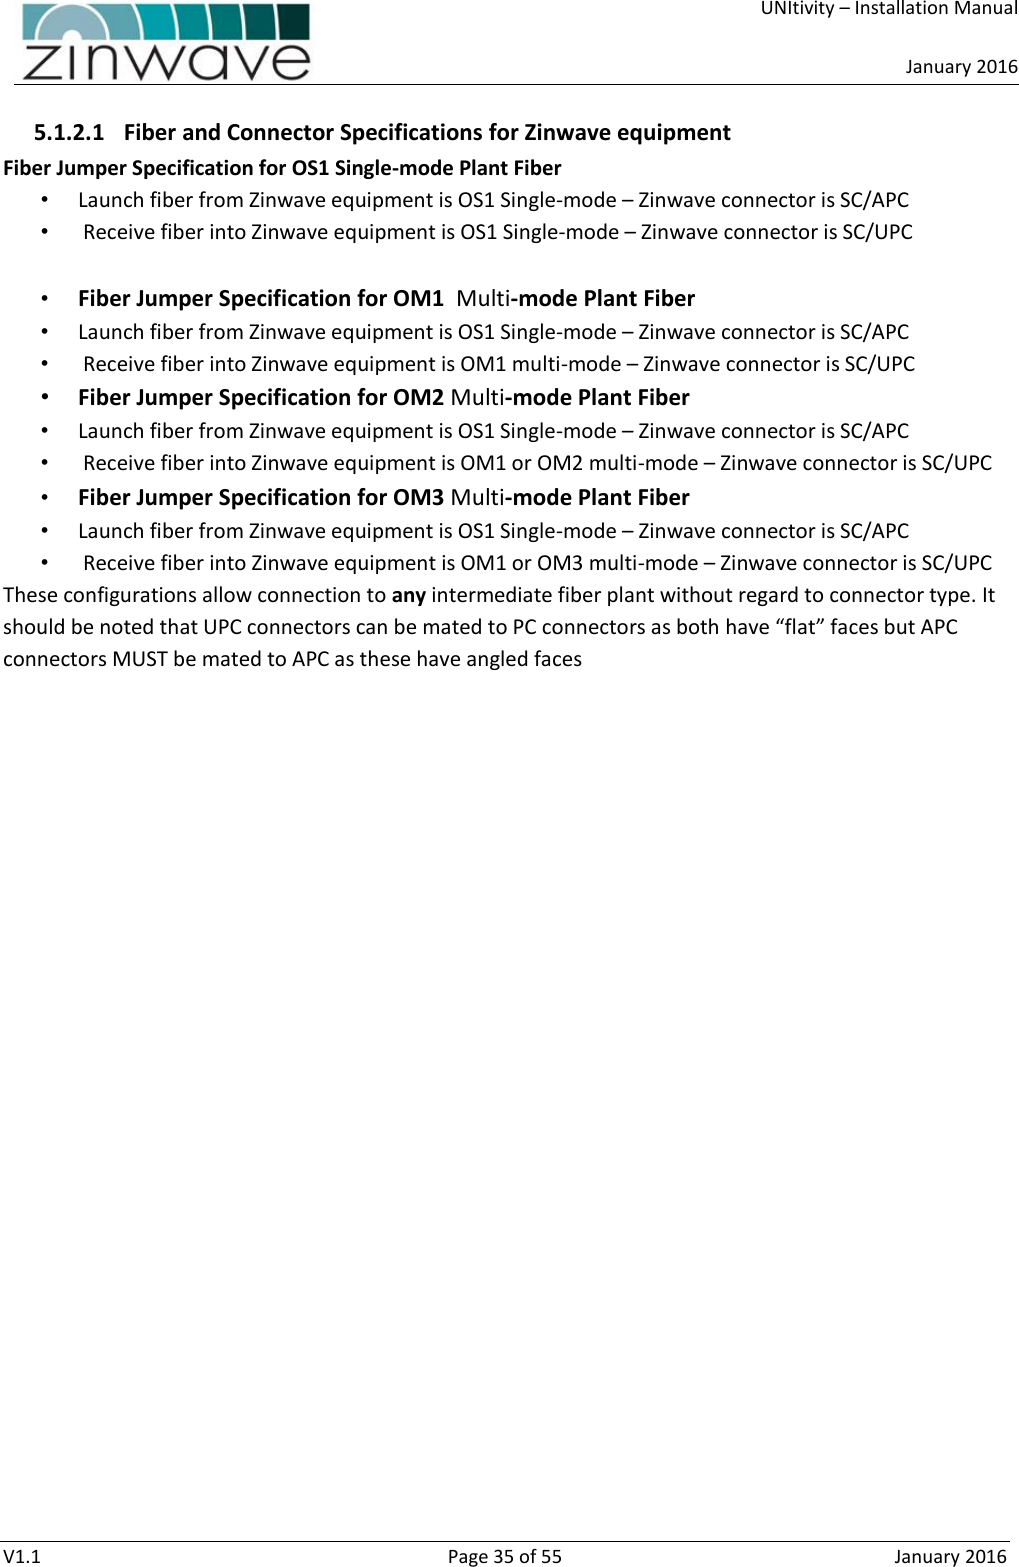     UNItivity – Installation Manual      January 2016  V1.1  Page 35 of 55  January 2016 5.1.2.1 Fiber and Connector Specifications for Zinwave equipment Fiber Jumper Specification for OS1 Single-mode Plant Fiber • Launch fiber from Zinwave equipment is OS1 Single-mode – Zinwave connector is SC/APC •  Receive fiber into Zinwave equipment is OS1 Single-mode – Zinwave connector is SC/UPC  • Fiber Jumper Specification for OM1  Multi-mode Plant Fiber • Launch fiber from Zinwave equipment is OS1 Single-mode – Zinwave connector is SC/APC •  Receive fiber into Zinwave equipment is OM1 multi-mode – Zinwave connector is SC/UPC • Fiber Jumper Specification for OM2 Multi-mode Plant Fiber • Launch fiber from Zinwave equipment is OS1 Single-mode – Zinwave connector is SC/APC •  Receive fiber into Zinwave equipment is OM1 or OM2 multi-mode – Zinwave connector is SC/UPC • Fiber Jumper Specification for OM3 Multi-mode Plant Fiber • Launch fiber from Zinwave equipment is OS1 Single-mode – Zinwave connector is SC/APC •  Receive fiber into Zinwave equipment is OM1 or OM3 multi-mode – Zinwave connector is SC/UPC These configurations allow connection to any intermediate fiber plant without regard to connector type. It should be noted that UPC connectors can be mated to PC connectors as both have “flat” faces but APC connectors MUST be mated to APC as these have angled faces    